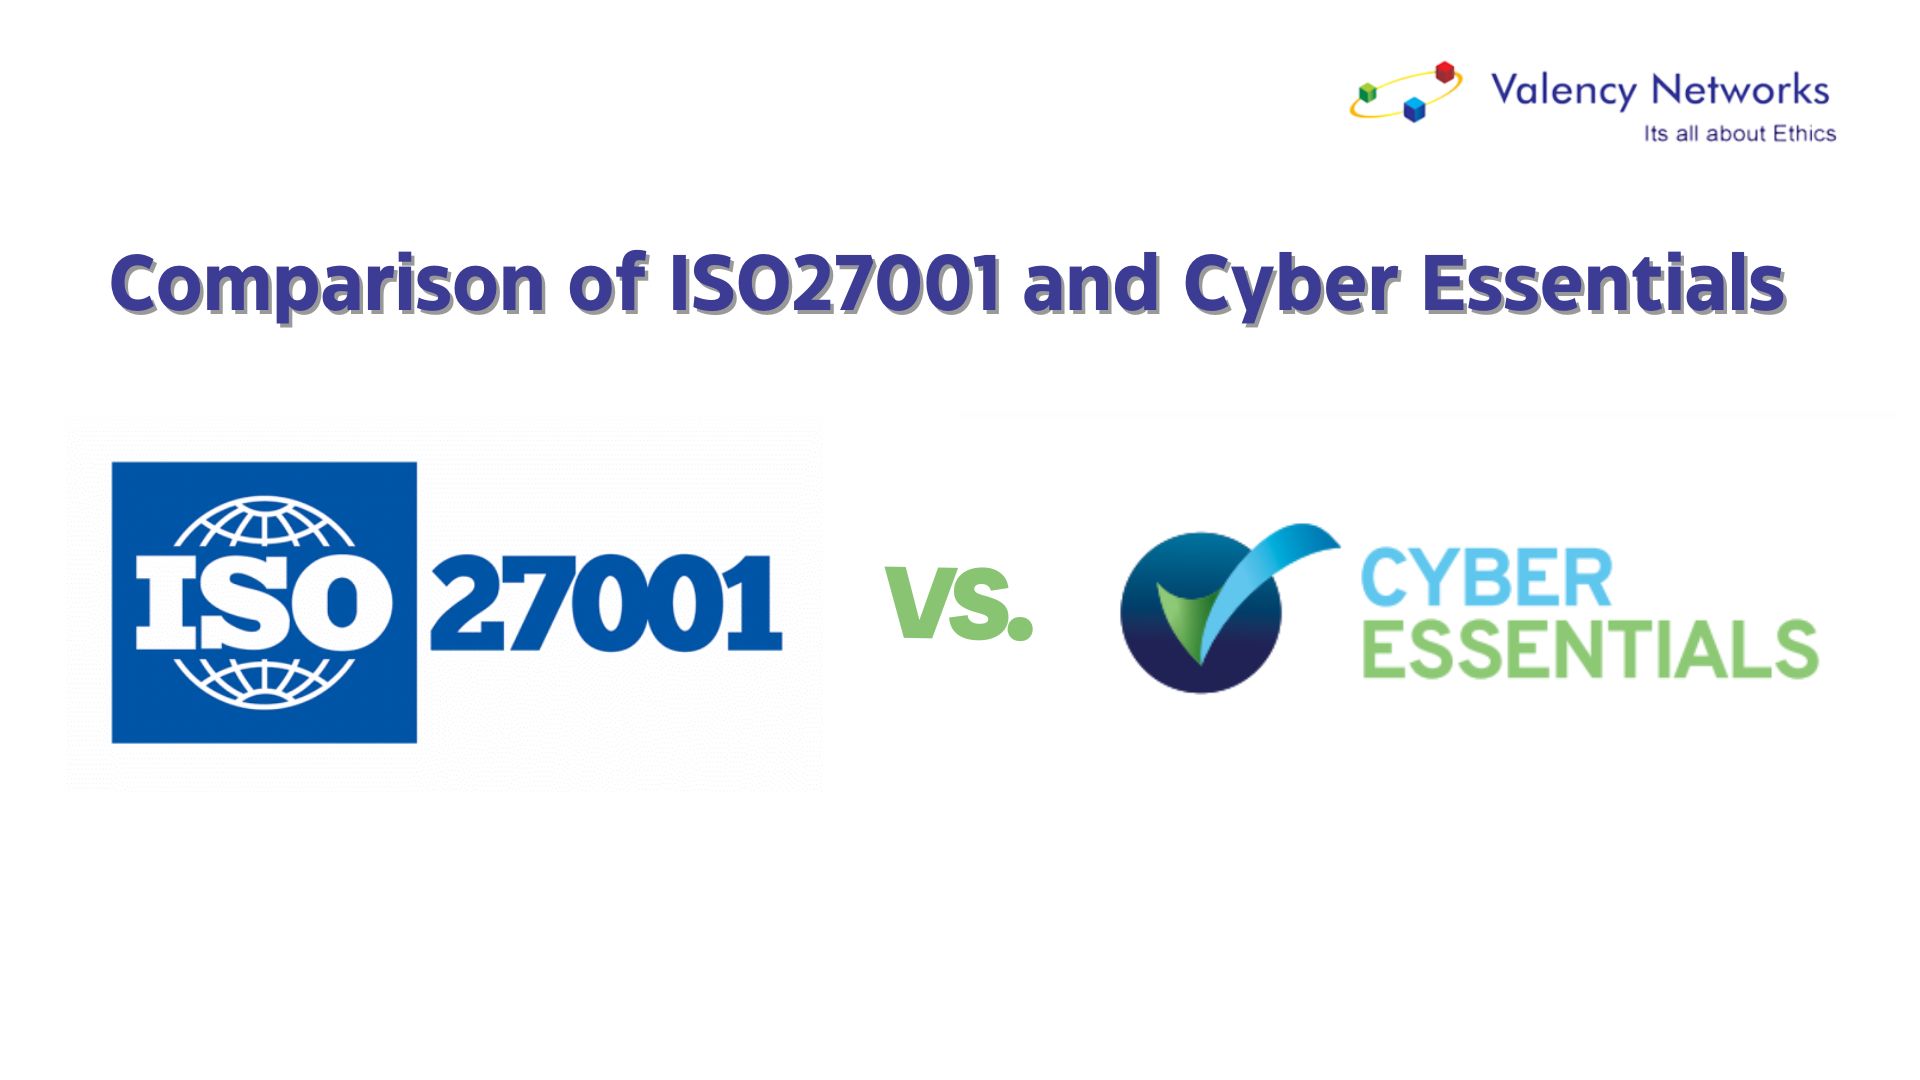 Comparison of ISO27001 and Cyber Essentials